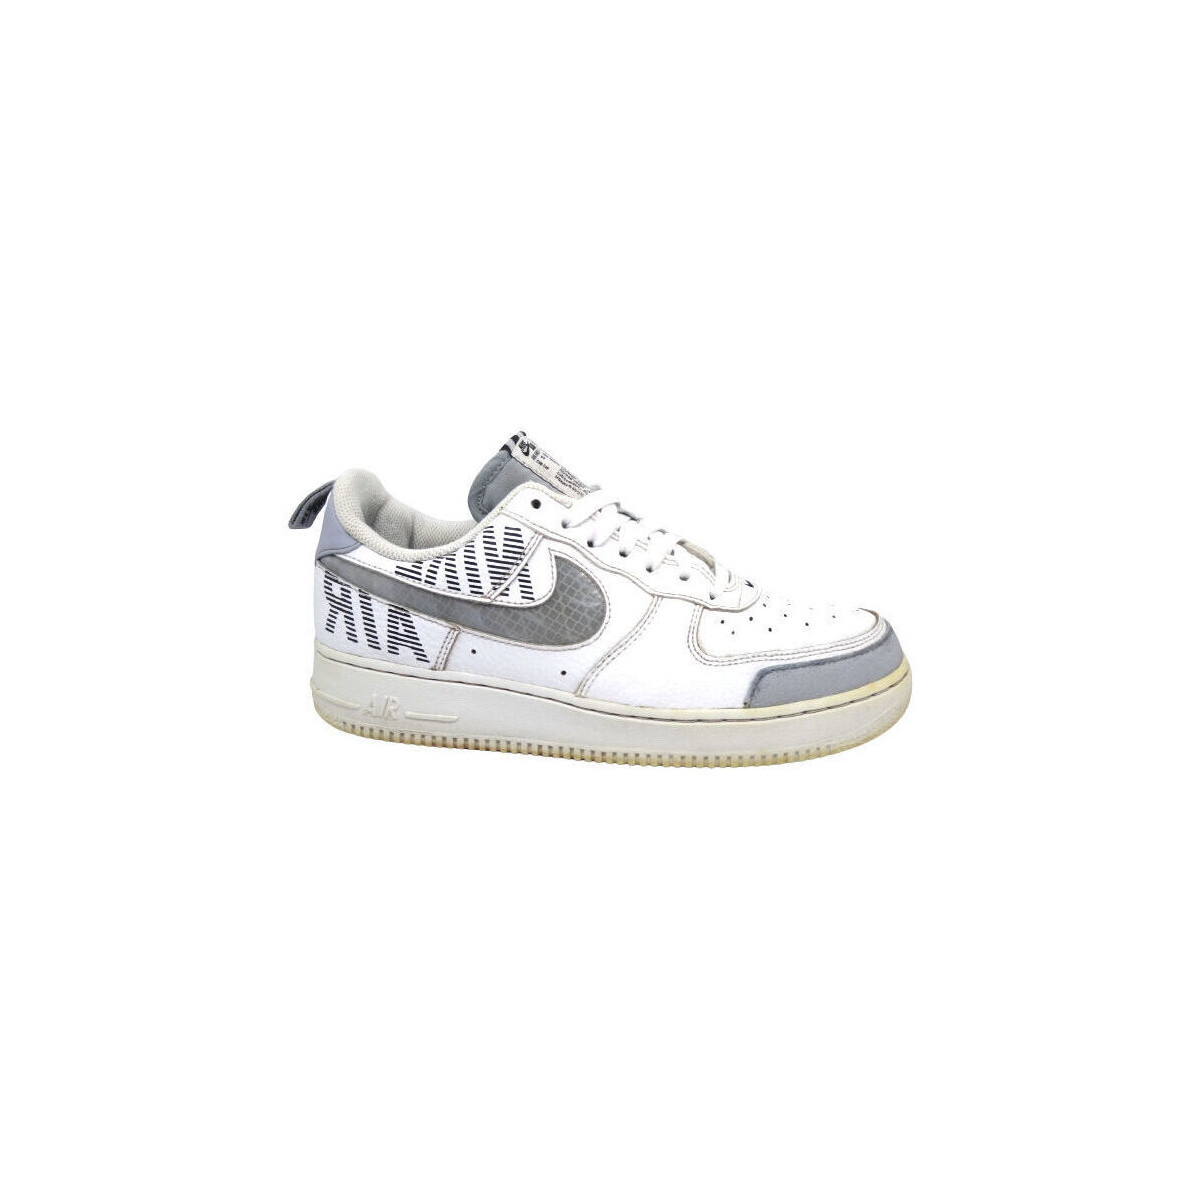 Basket Nike Reconditionne Air Force 1   26846015 1200 A